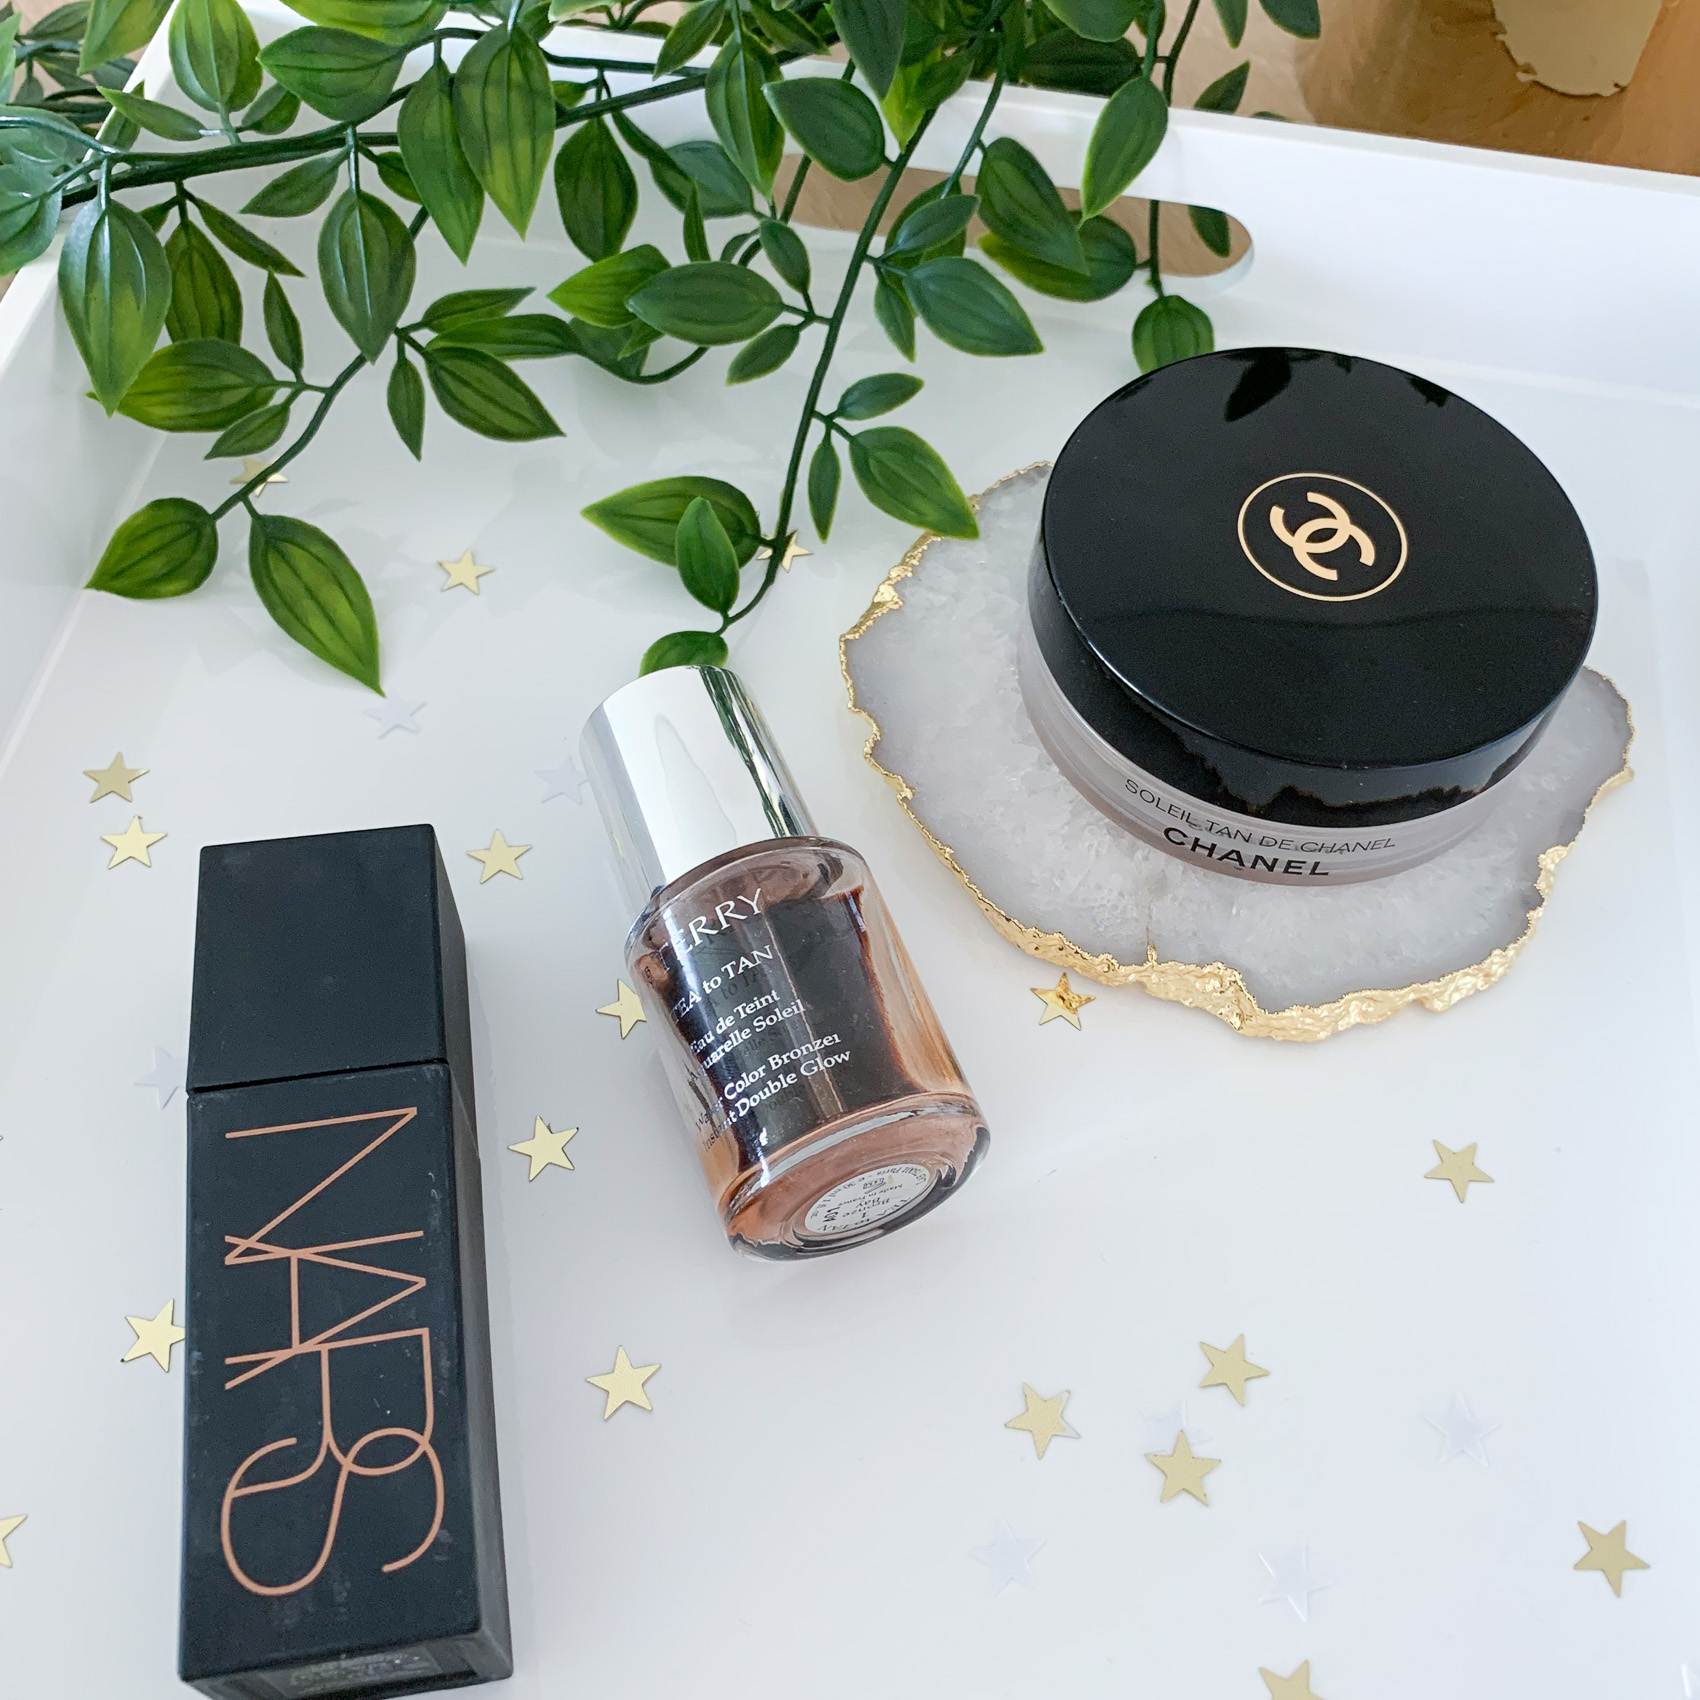 BY TERRY - Tea to Tan Face and Body CHANEL SOLEIL TAN DE CHANEL Bronzing Make–Up Base NARS Laguna Liquid Bronzer